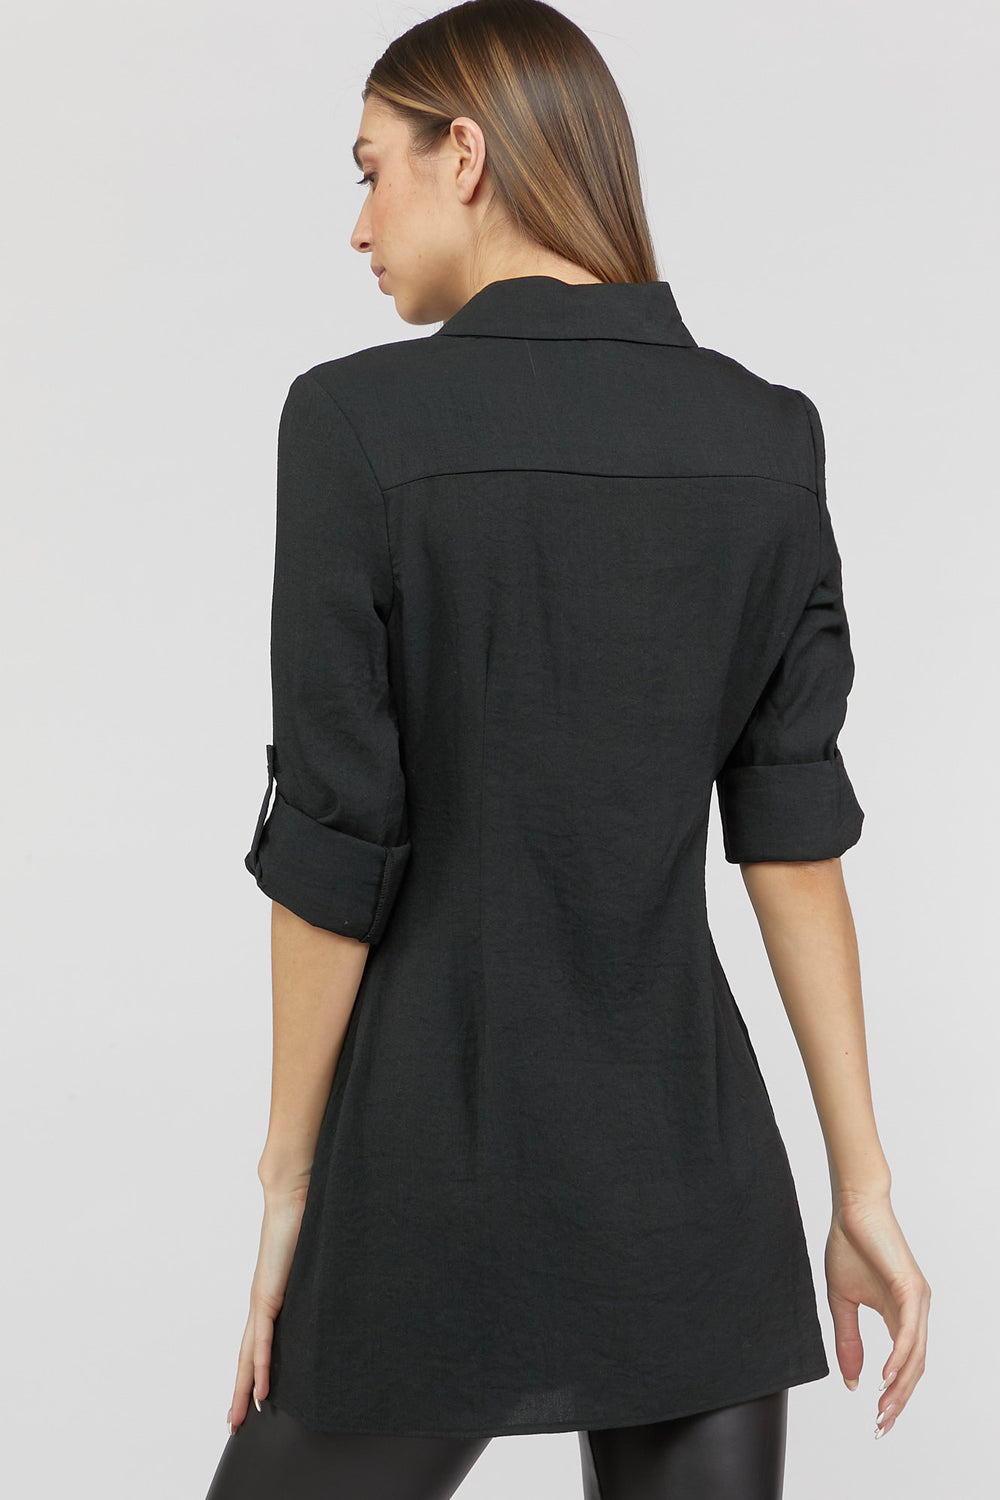 Ruched Button-Front Shirt Black